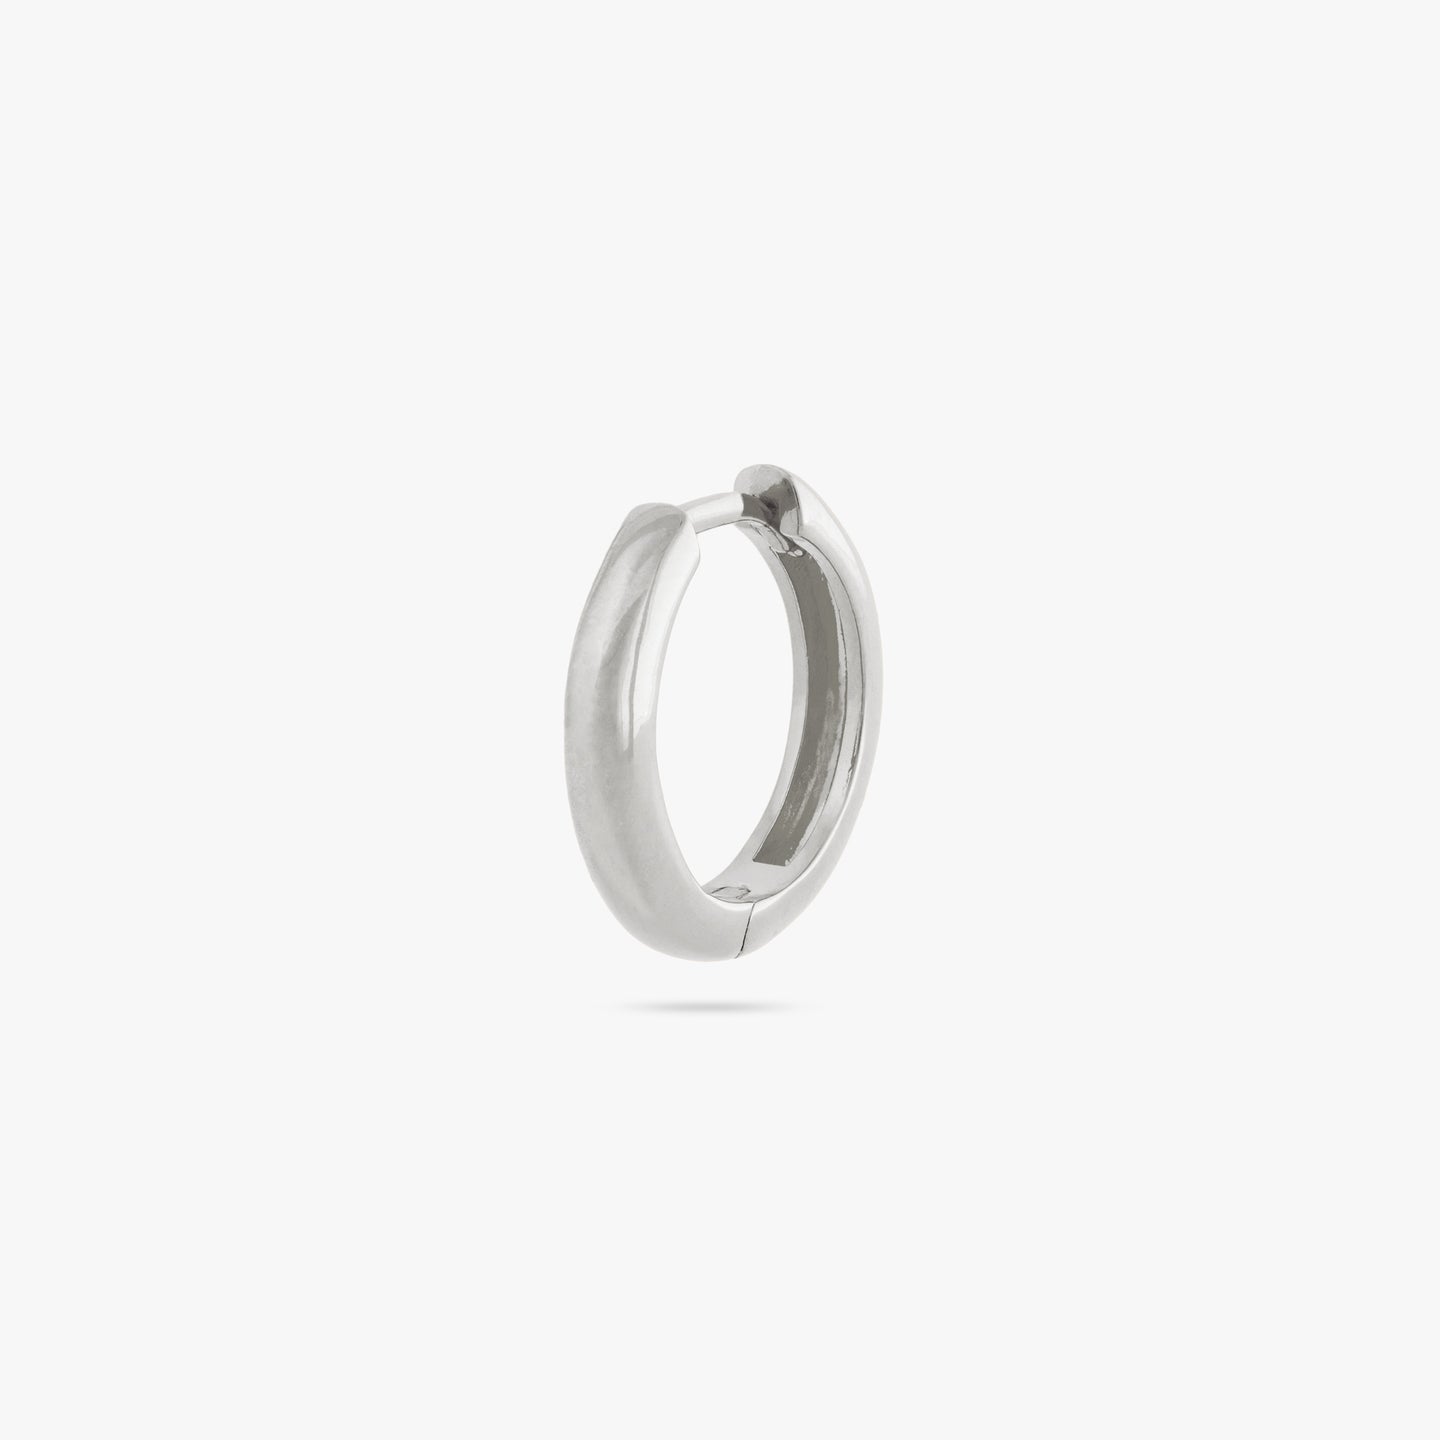 Small bulky and chunky shaped silver hoop color:null|silver